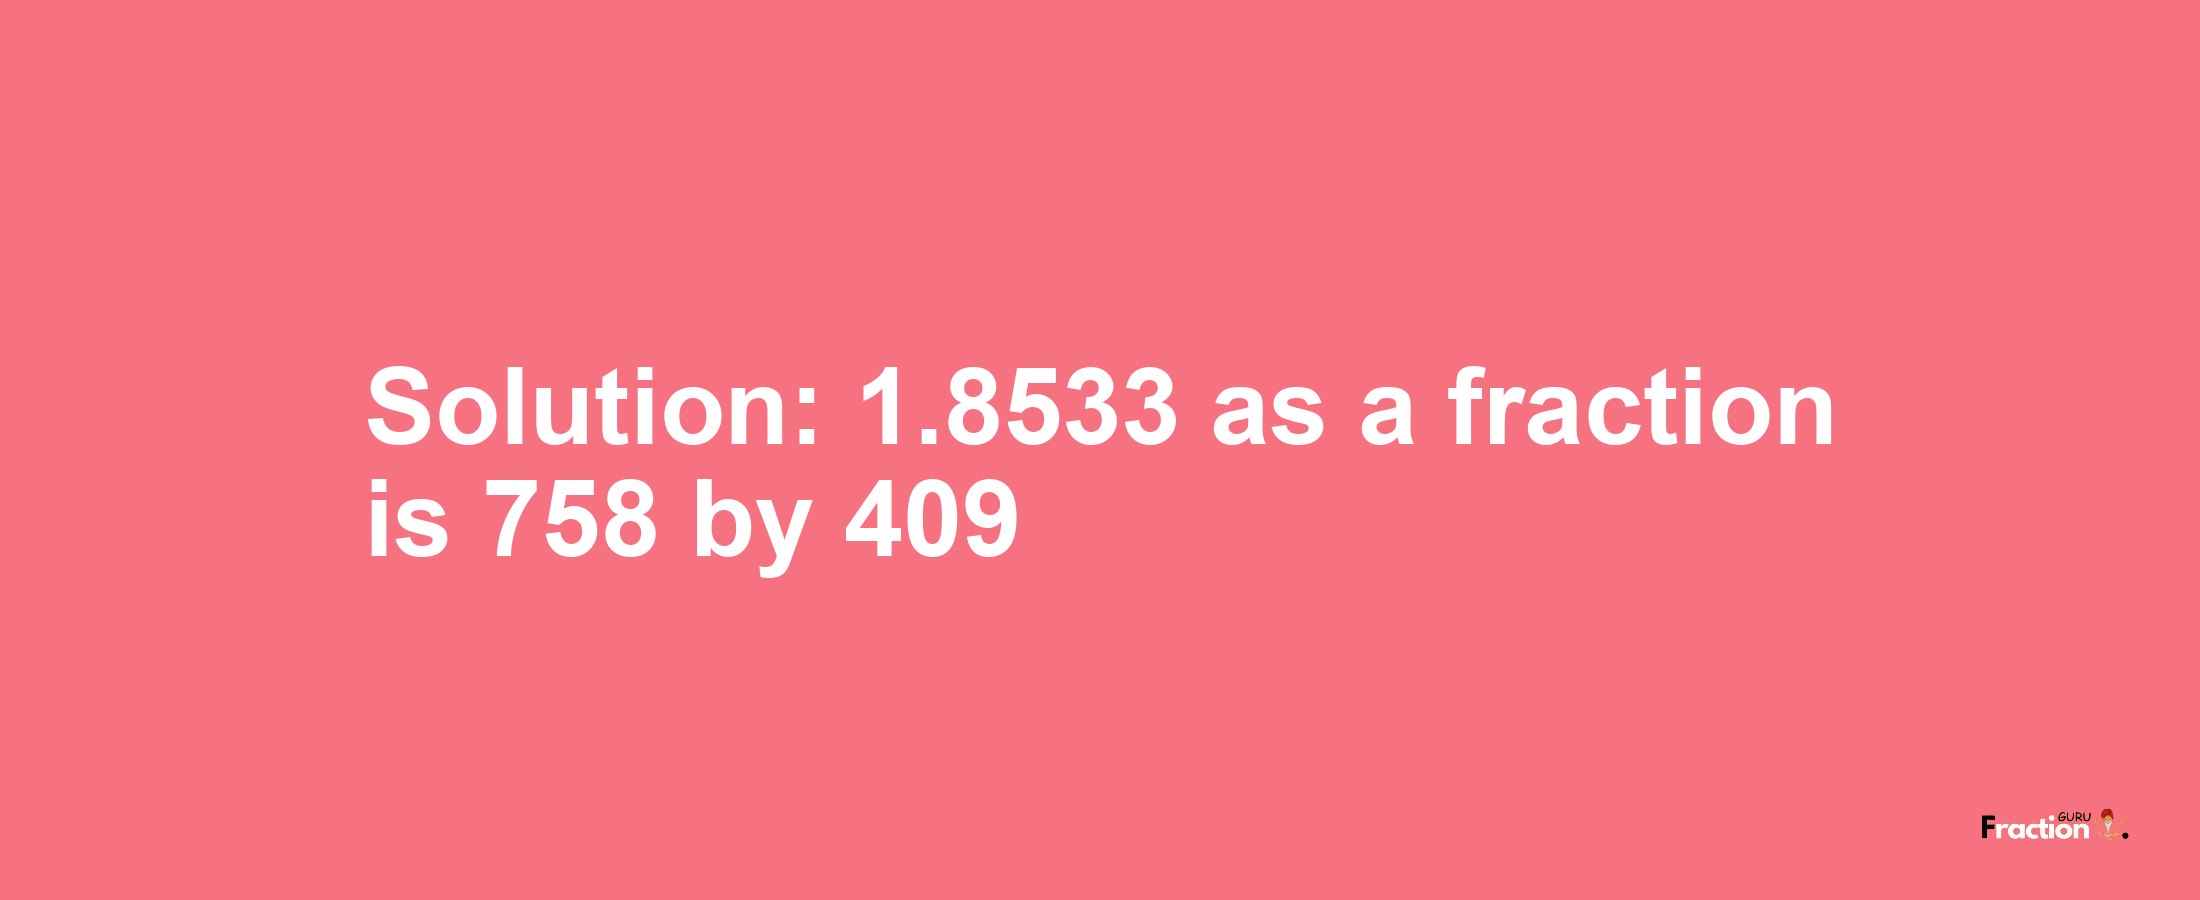 Solution:1.8533 as a fraction is 758/409